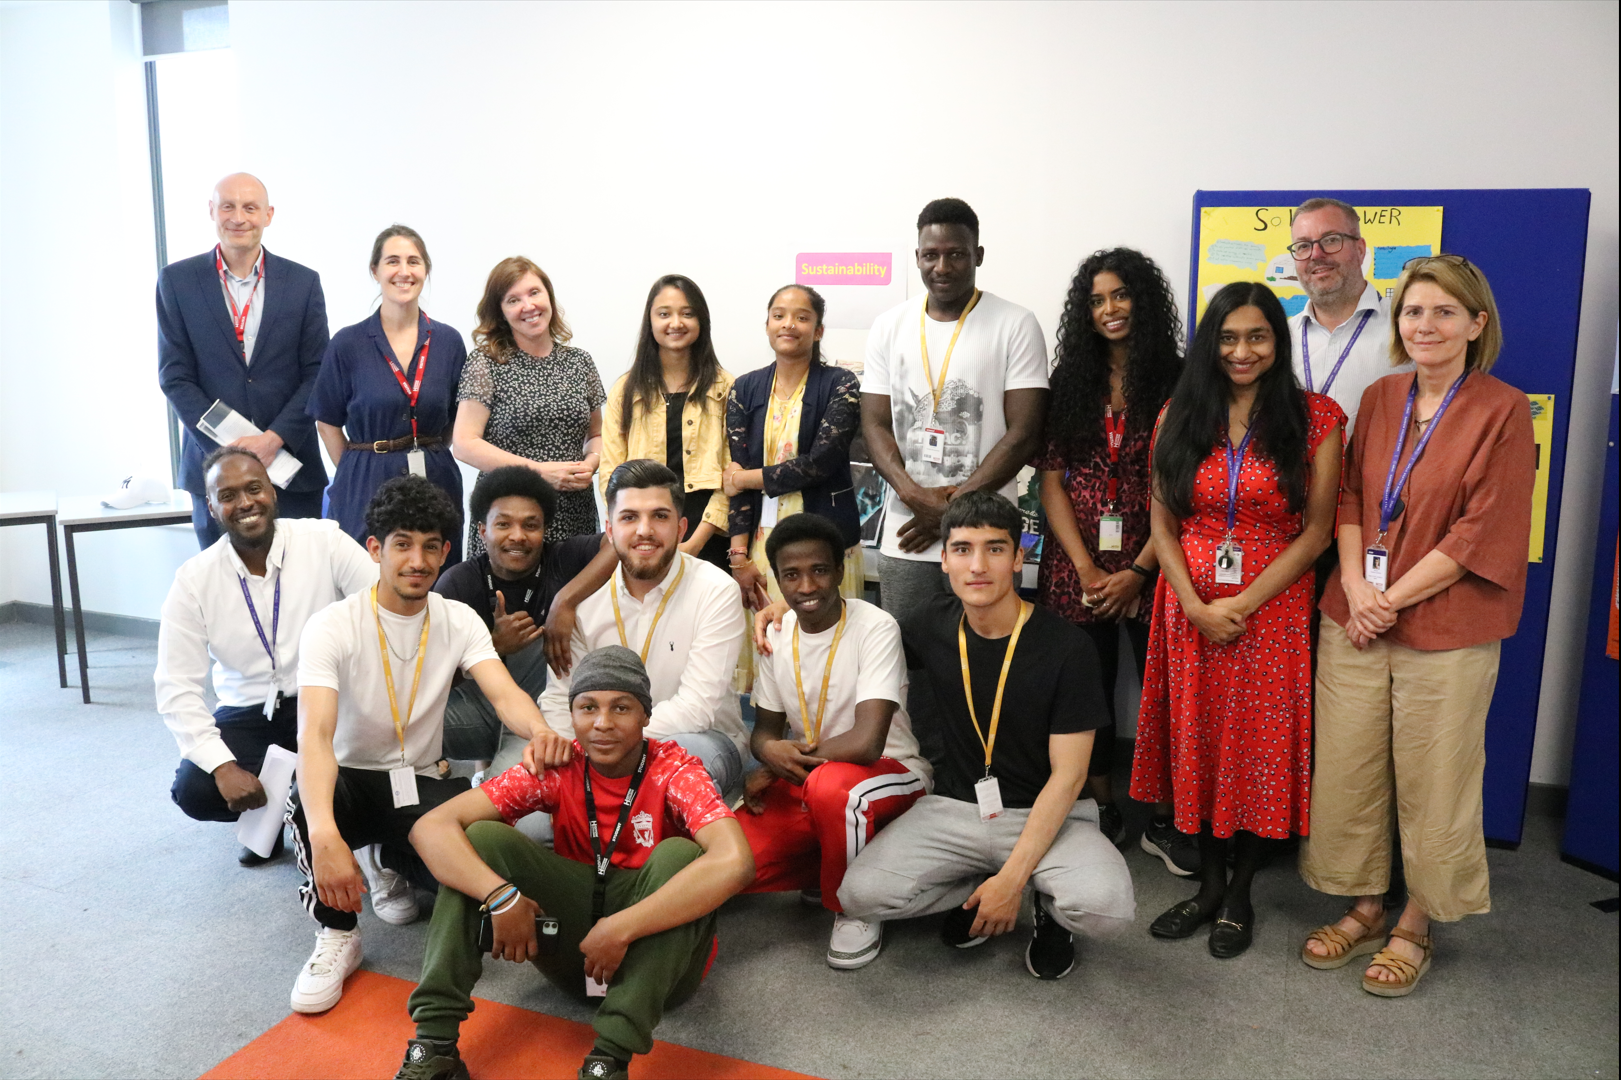 Group shot including a number of students along with Harrow College staff as well as the Children's Commissioner for England.